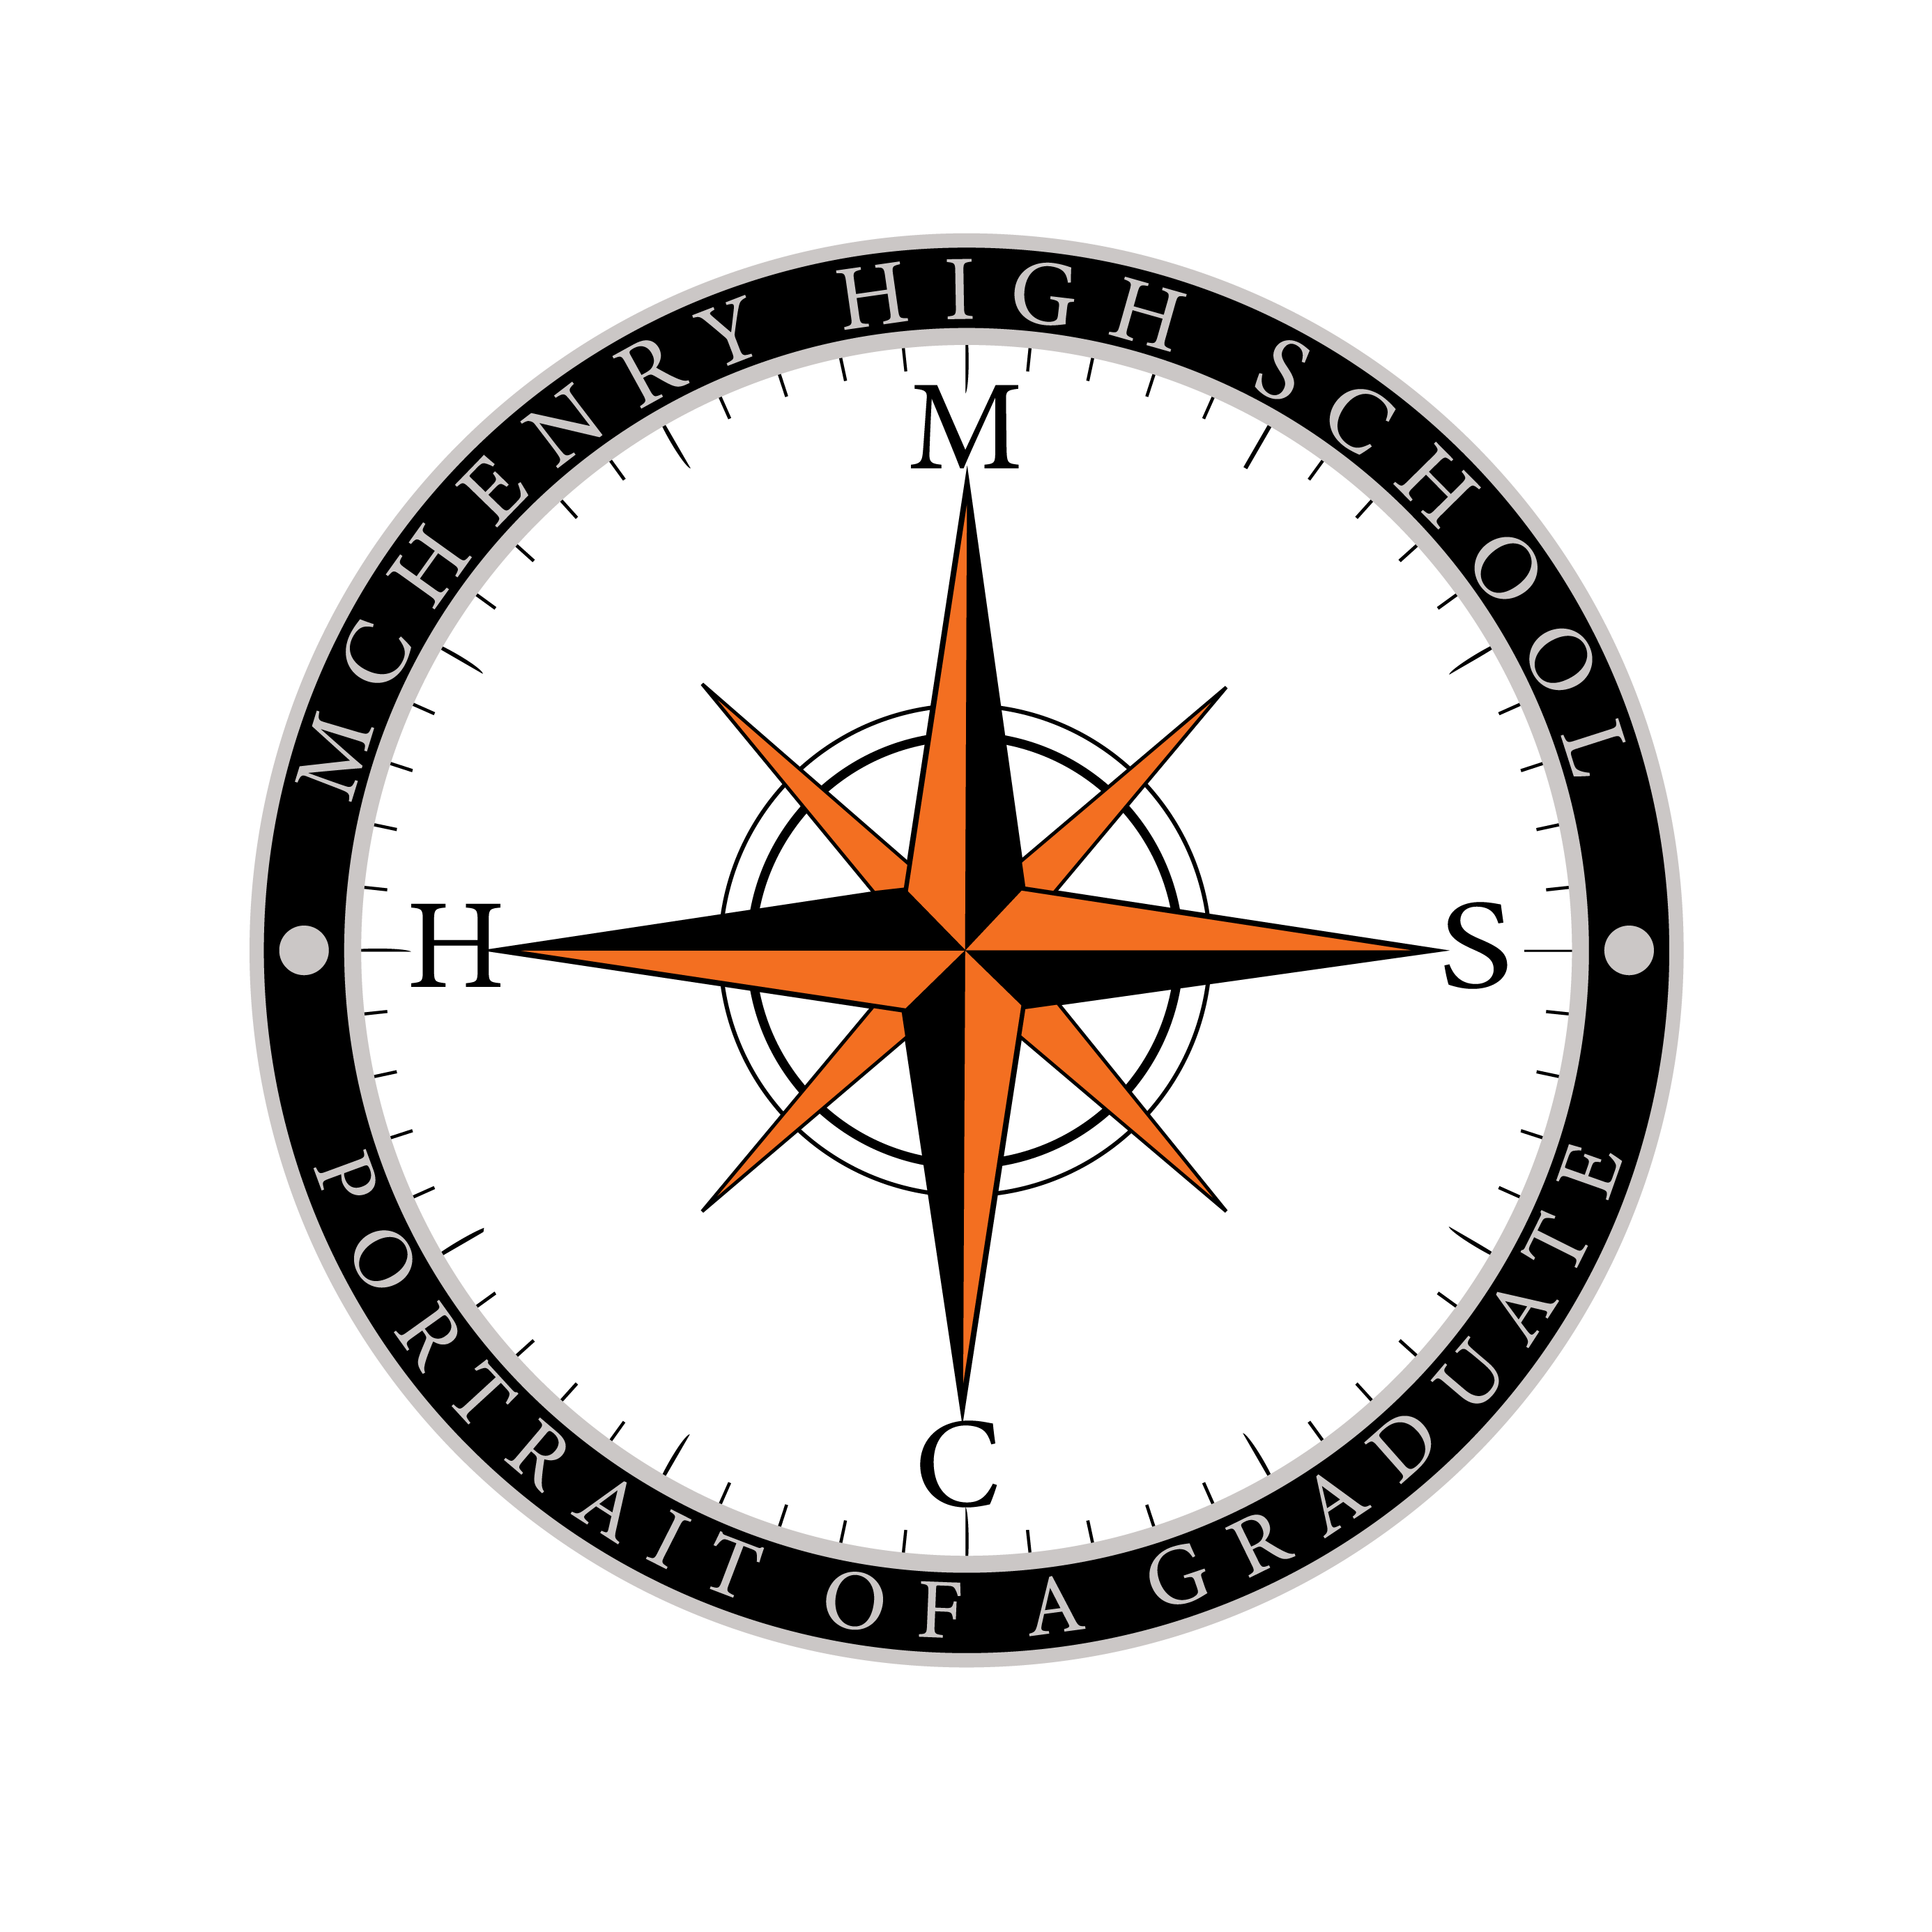 McHenry High School Portrait of a Graduate Compass pointing to M C H S